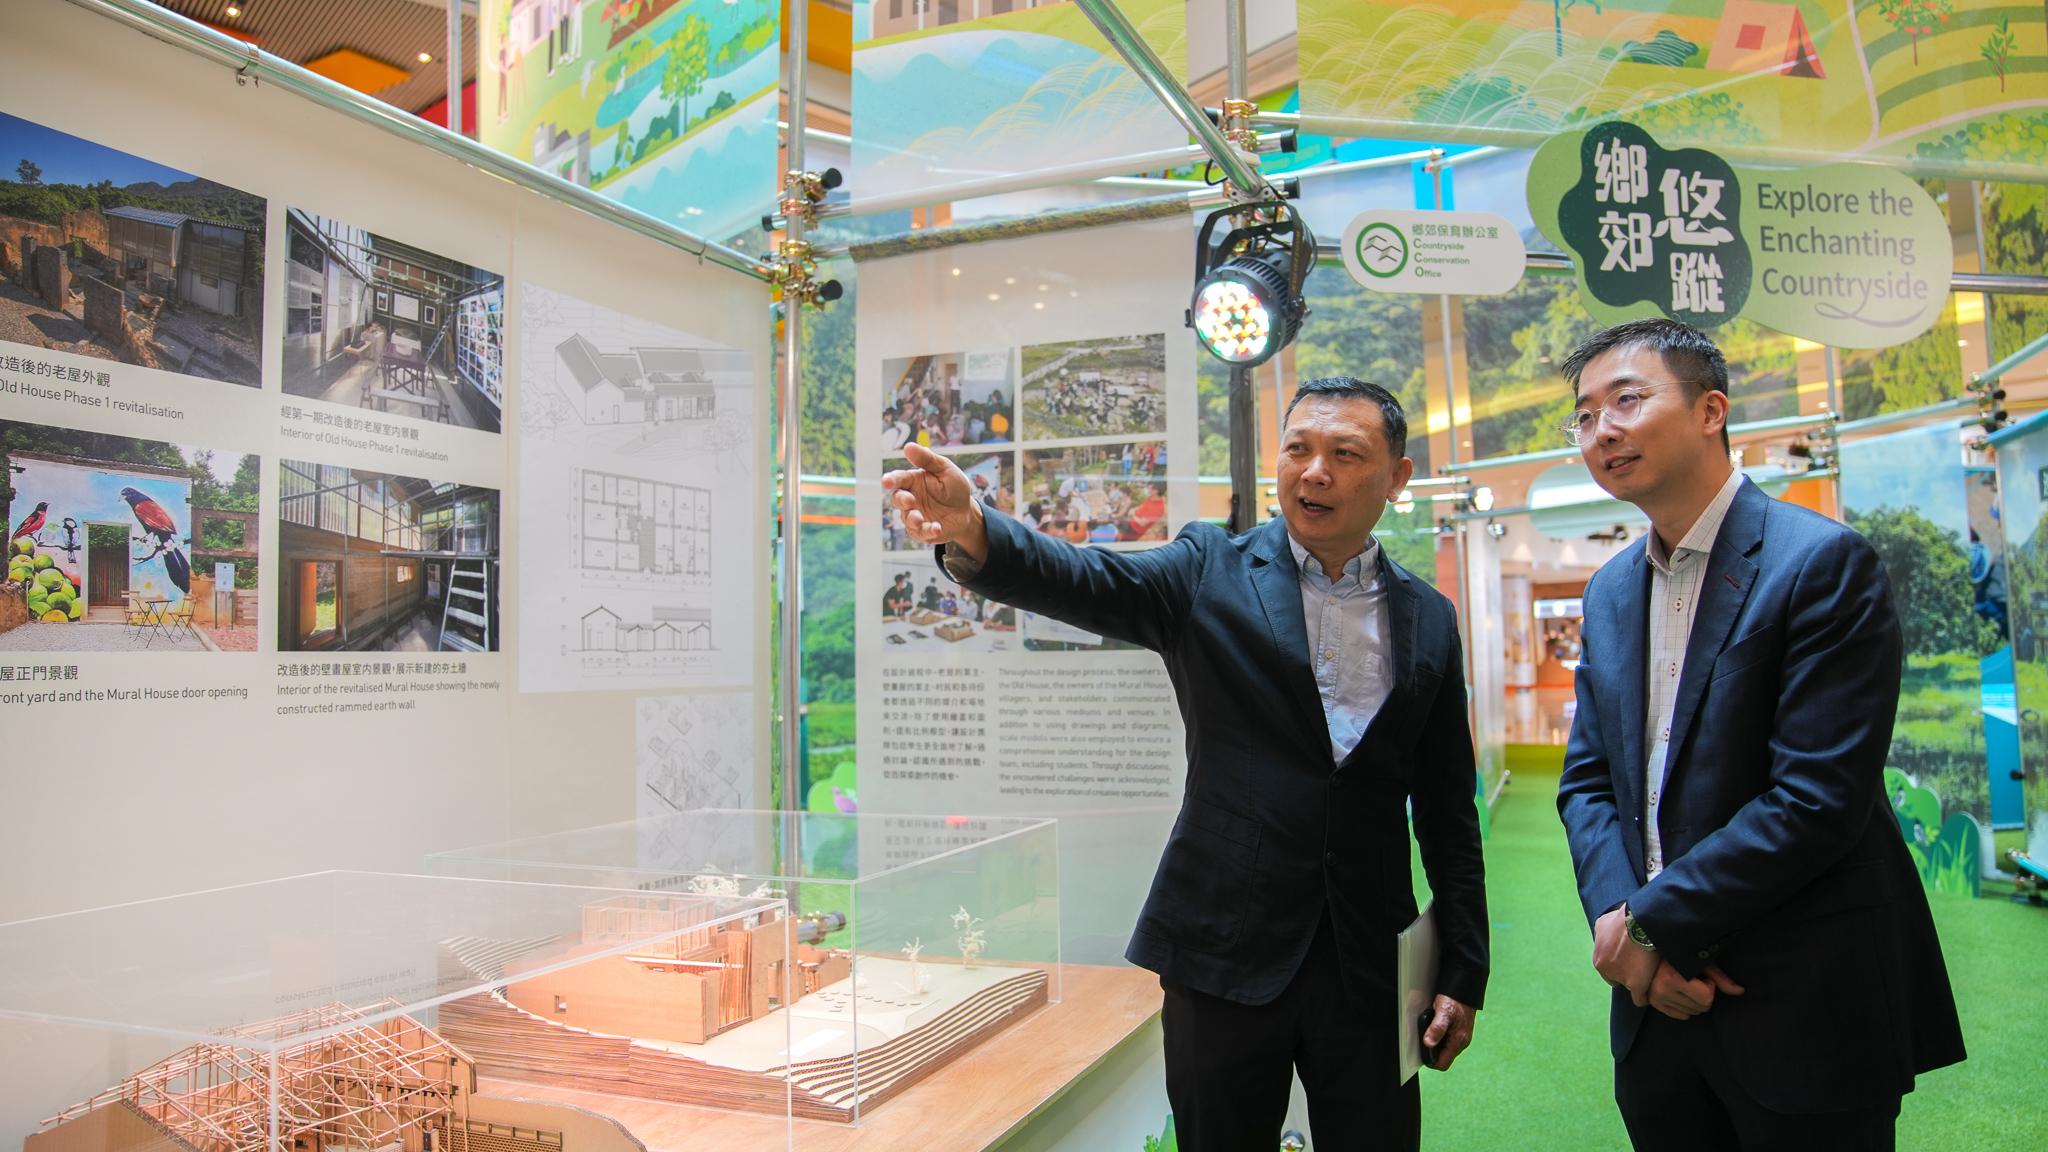 Organised by the Countryside Conservation Office (CCO), the roving exhibition entitled "Explore the Enchanting Countryside" will be launched tomorrow (February 20). It aims to showcase the culture and natural ecology of Hong Kong's countryside areas and encourage the public to explore Hong Kong's beautiful countryside villages. Photo shows the Principal Assistant Secretary for Environment and Ecology (Nature Conservation), Mr Desmond Wu (right), and the Head of the CCO, Professor Stephen Tang (left), visiting the exhibition today (February 19).